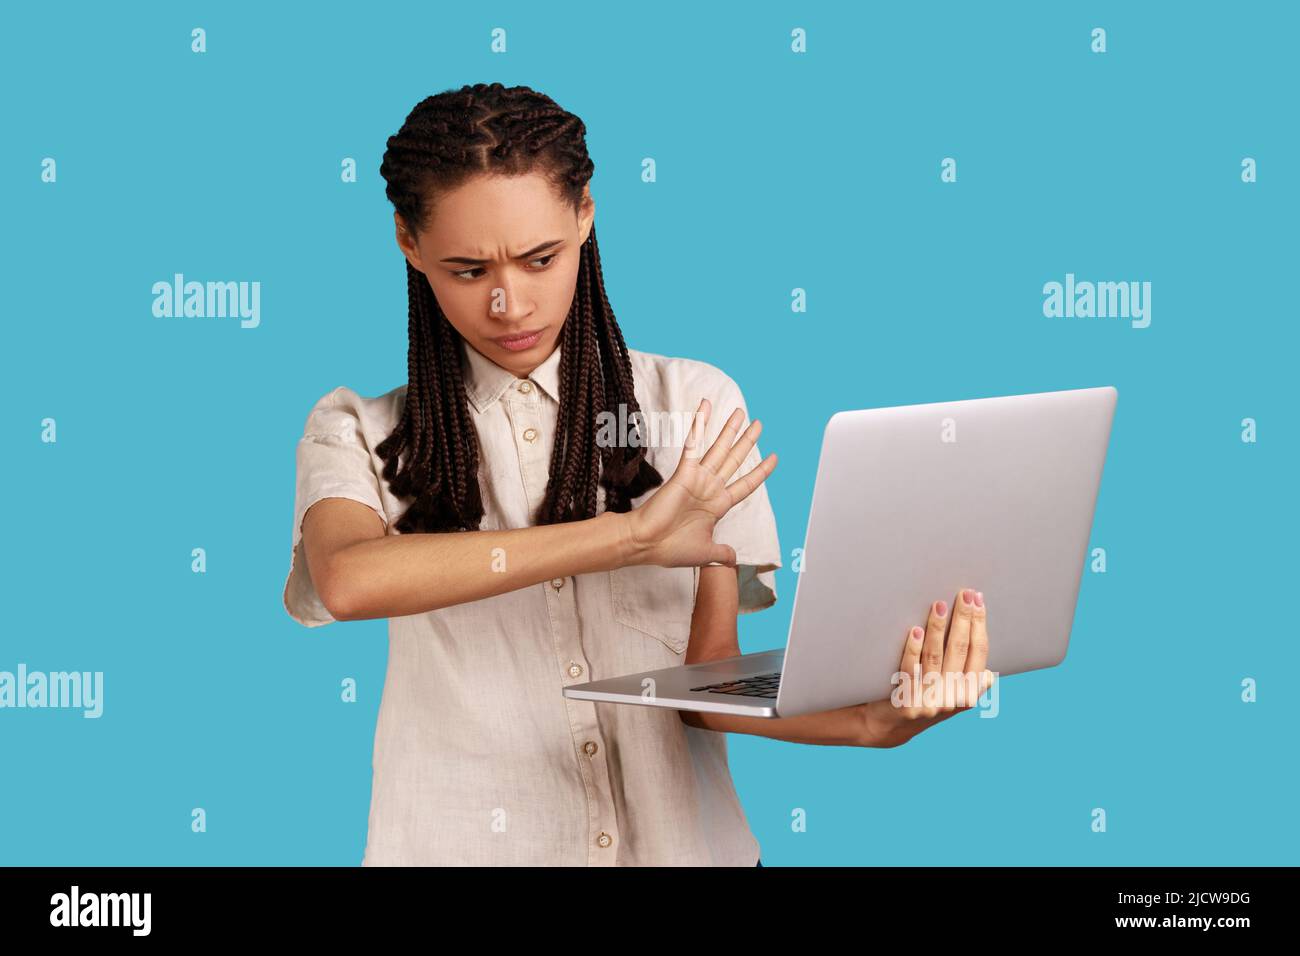 Portrait of woman with black dreadlocks showing stop gesture to laptop display, forbidden content, looking with disgust, wearing white shirt. Indoor studio shot isolated on blue background. Stock Photo